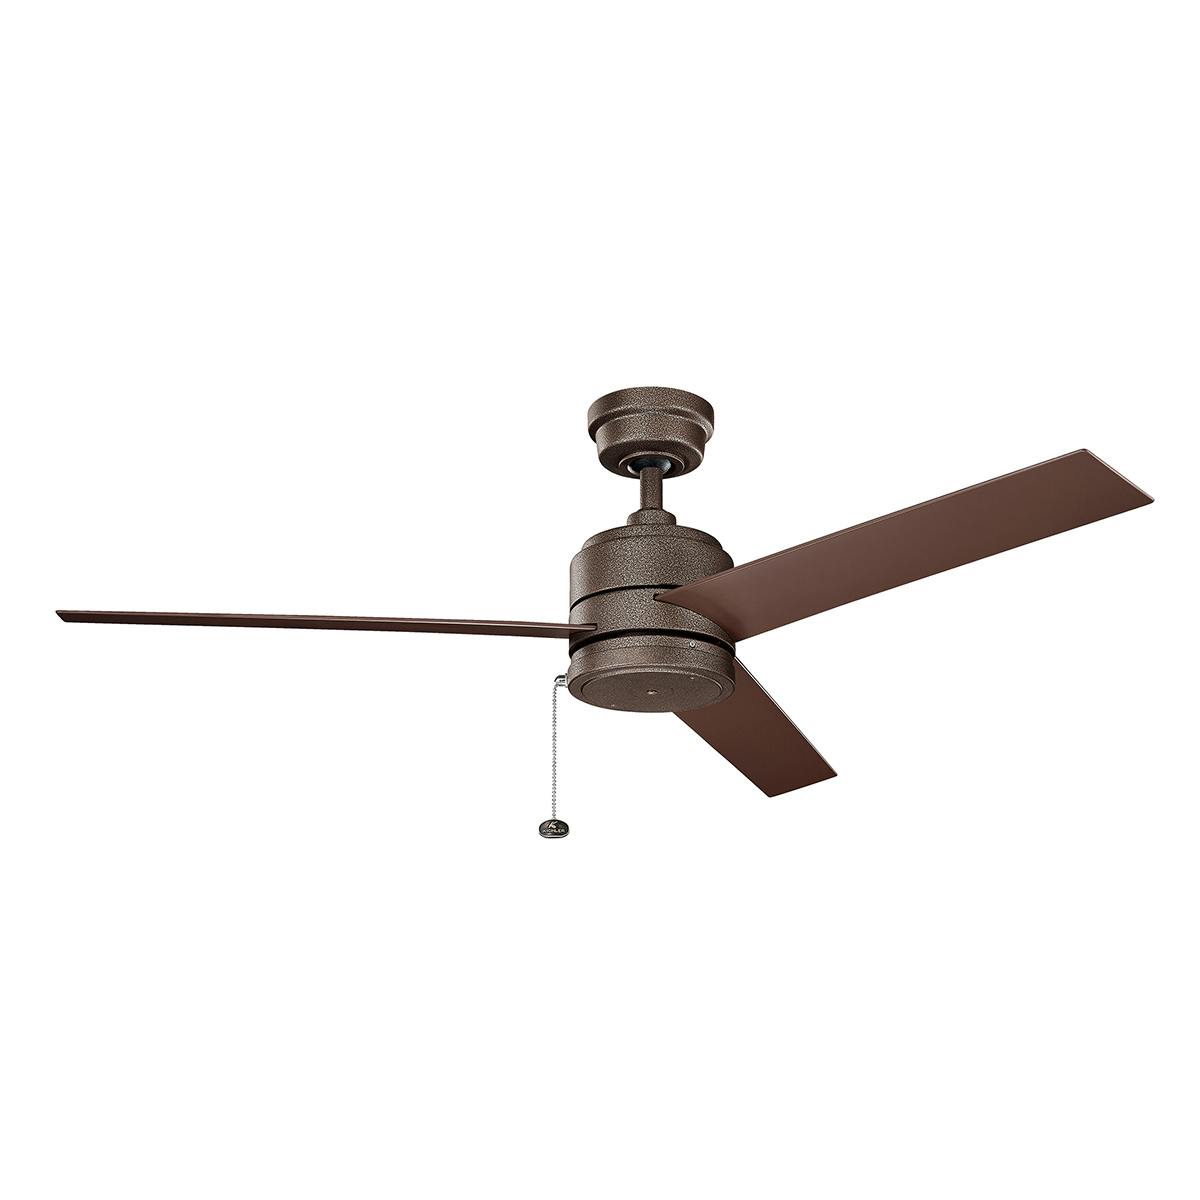 Arkwet™ 52" Fan Weathered Copper on a white background